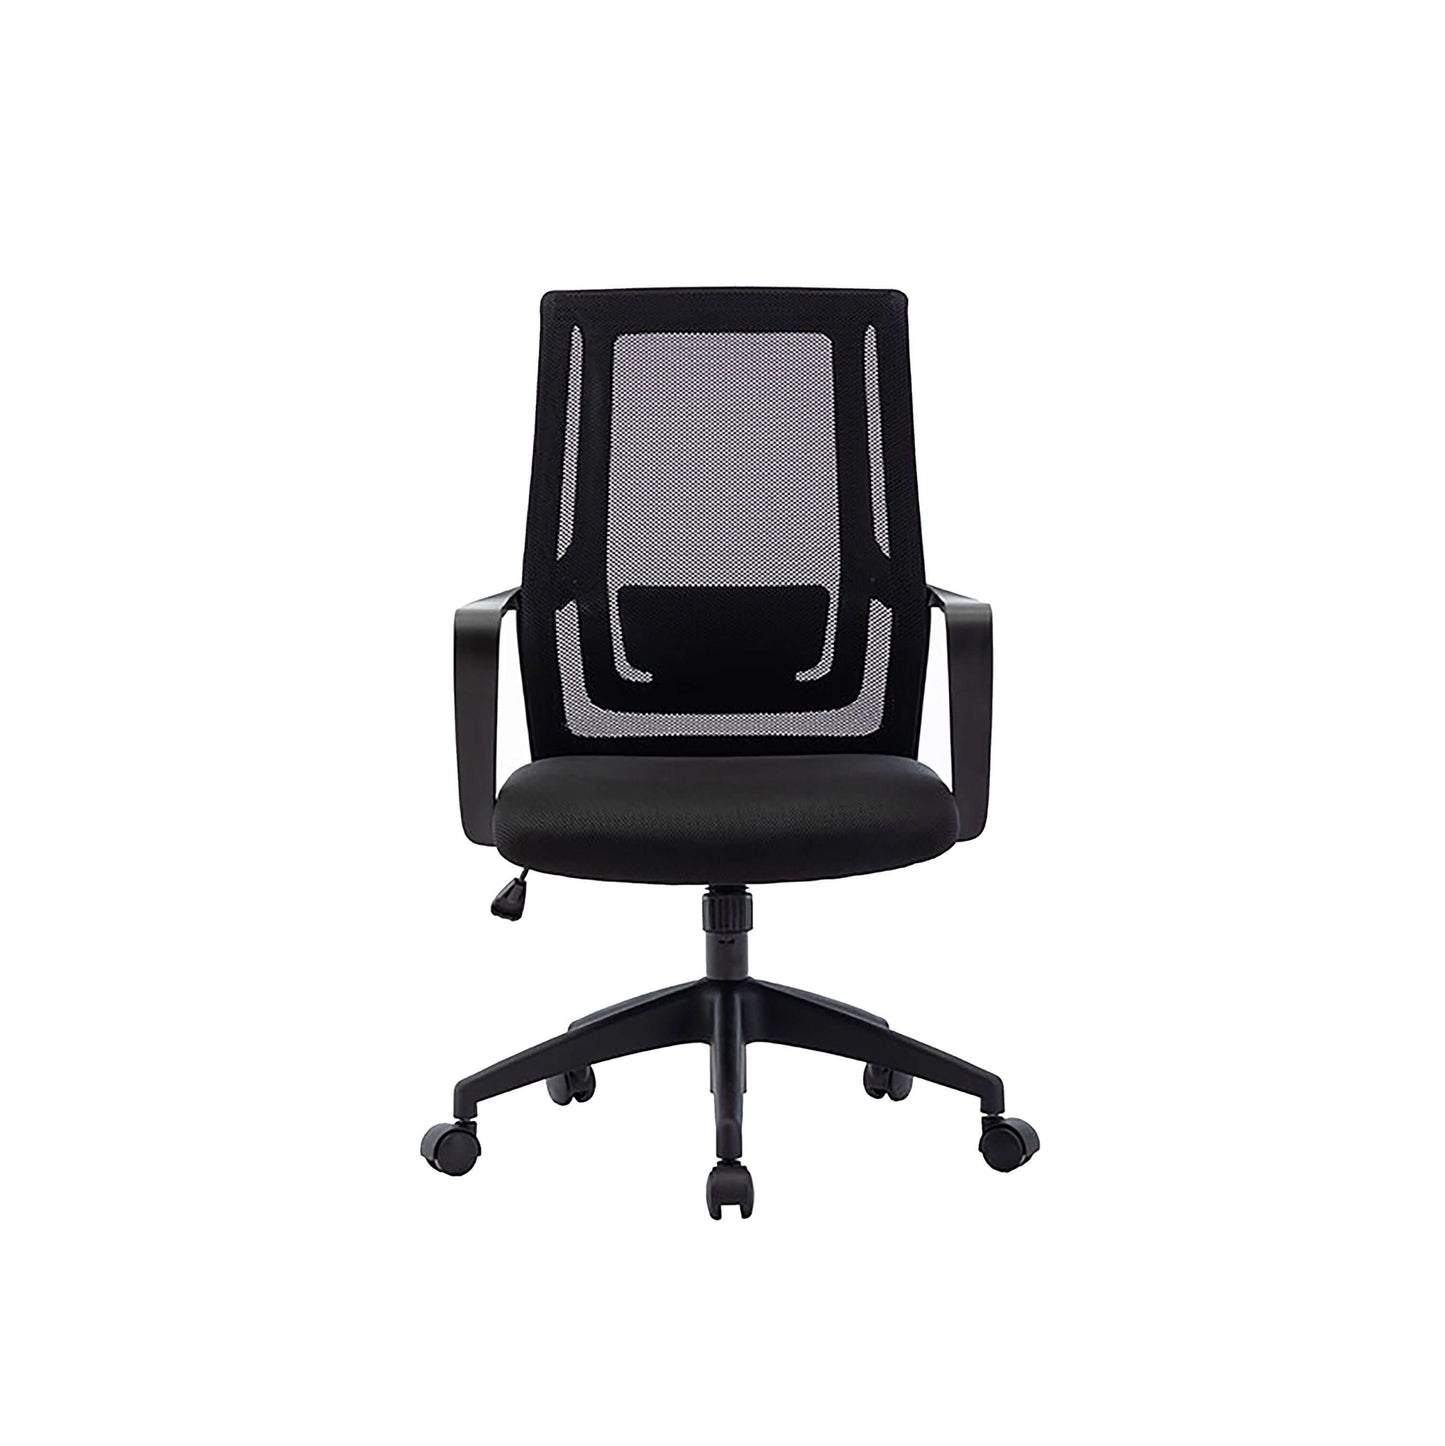 NEO - TASK CHAIR